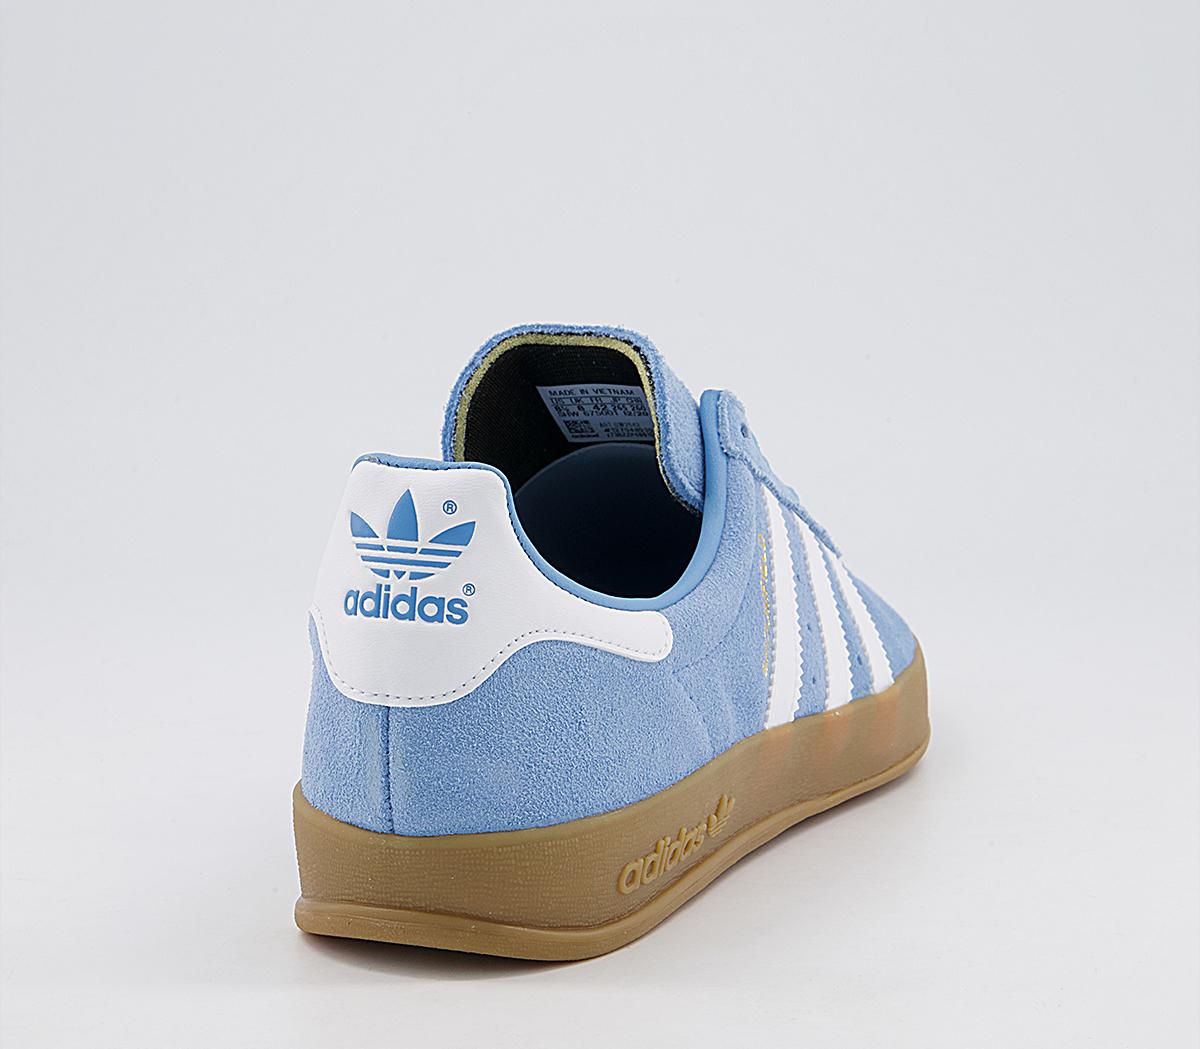 Adidas Broomfield Trainers Light Blue White Gum His Trainers 5887